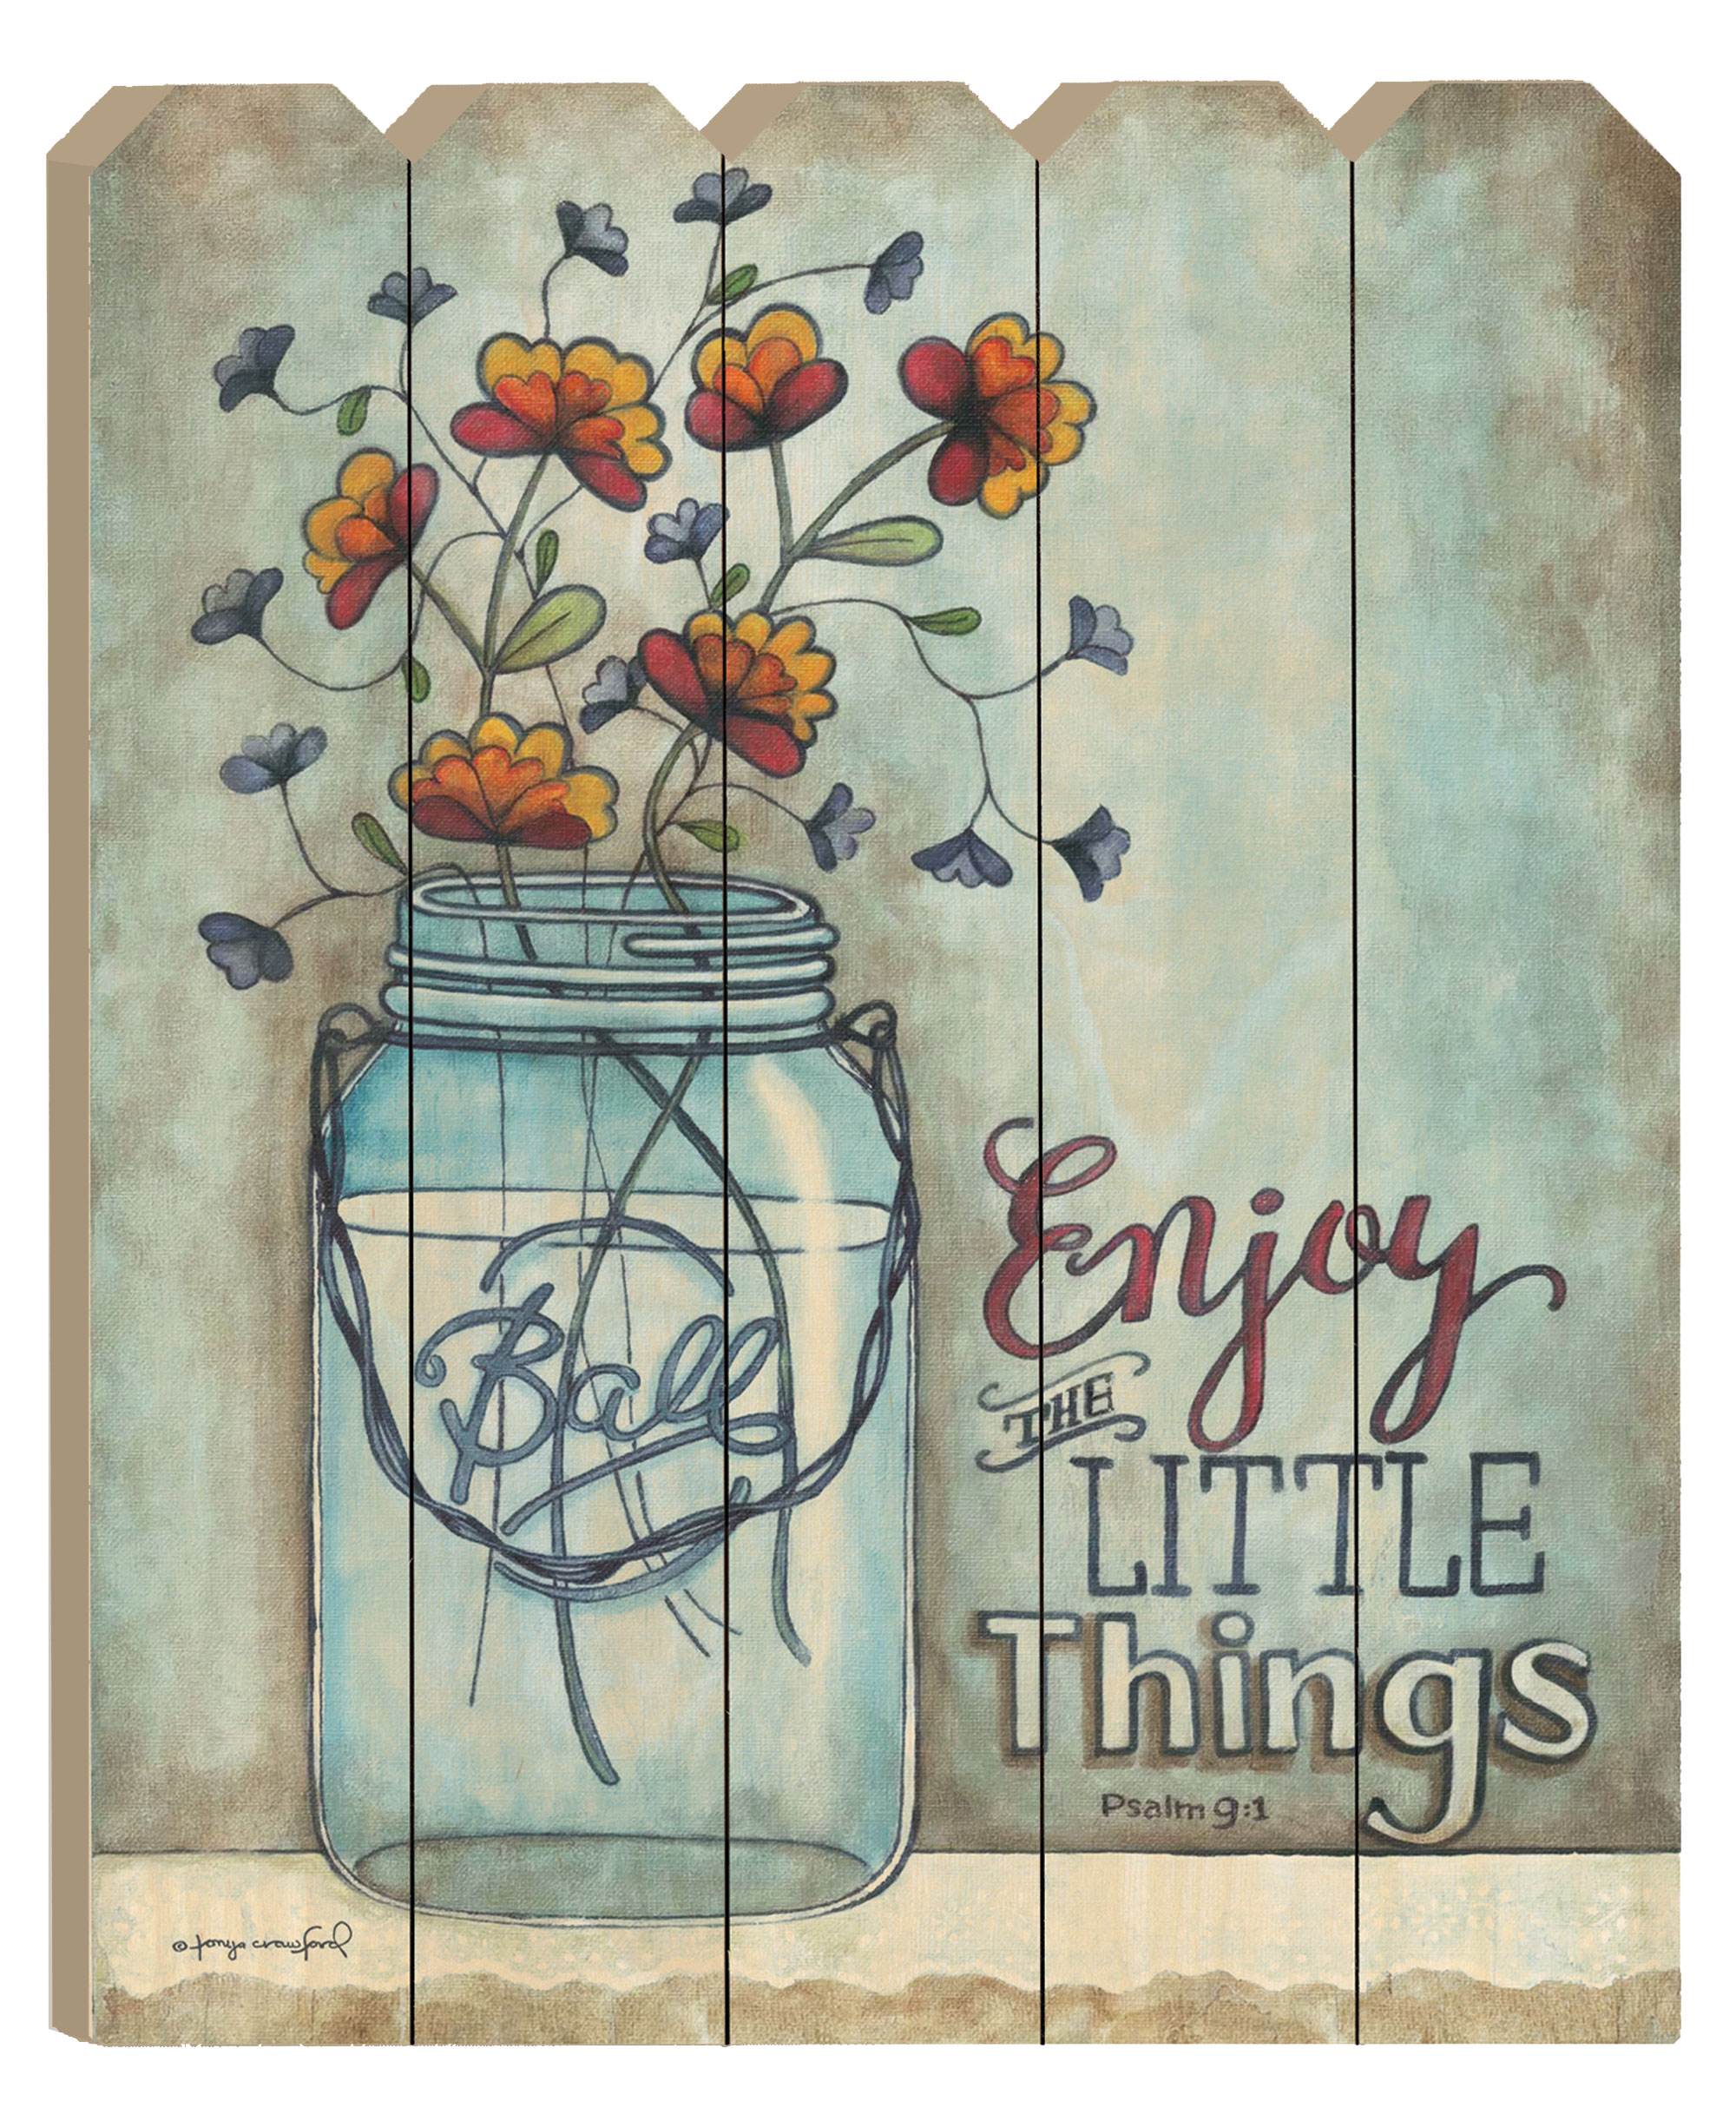 "Enjoy the little Things" By Artisan Tonya Crawford, Printed on Wooden Picket Fence Wall Art